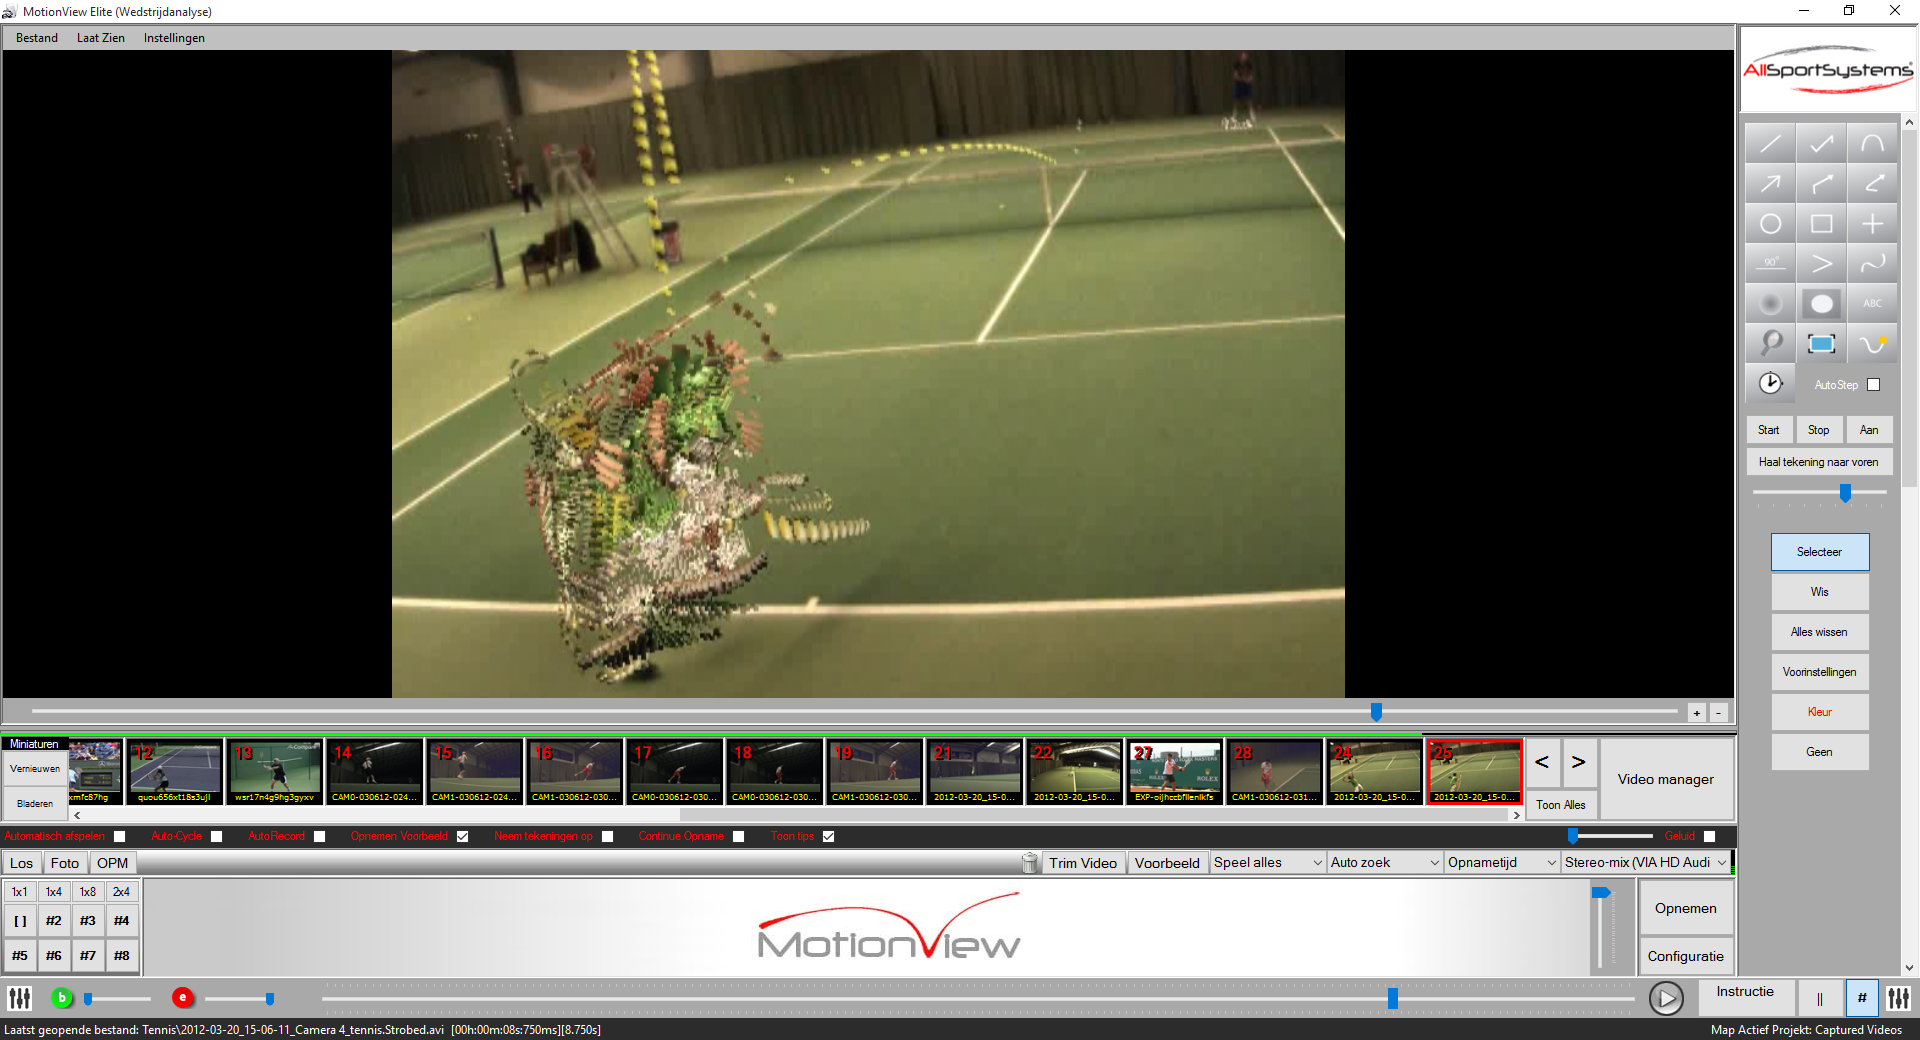 MotionView - Tennis - Video Analyse Software